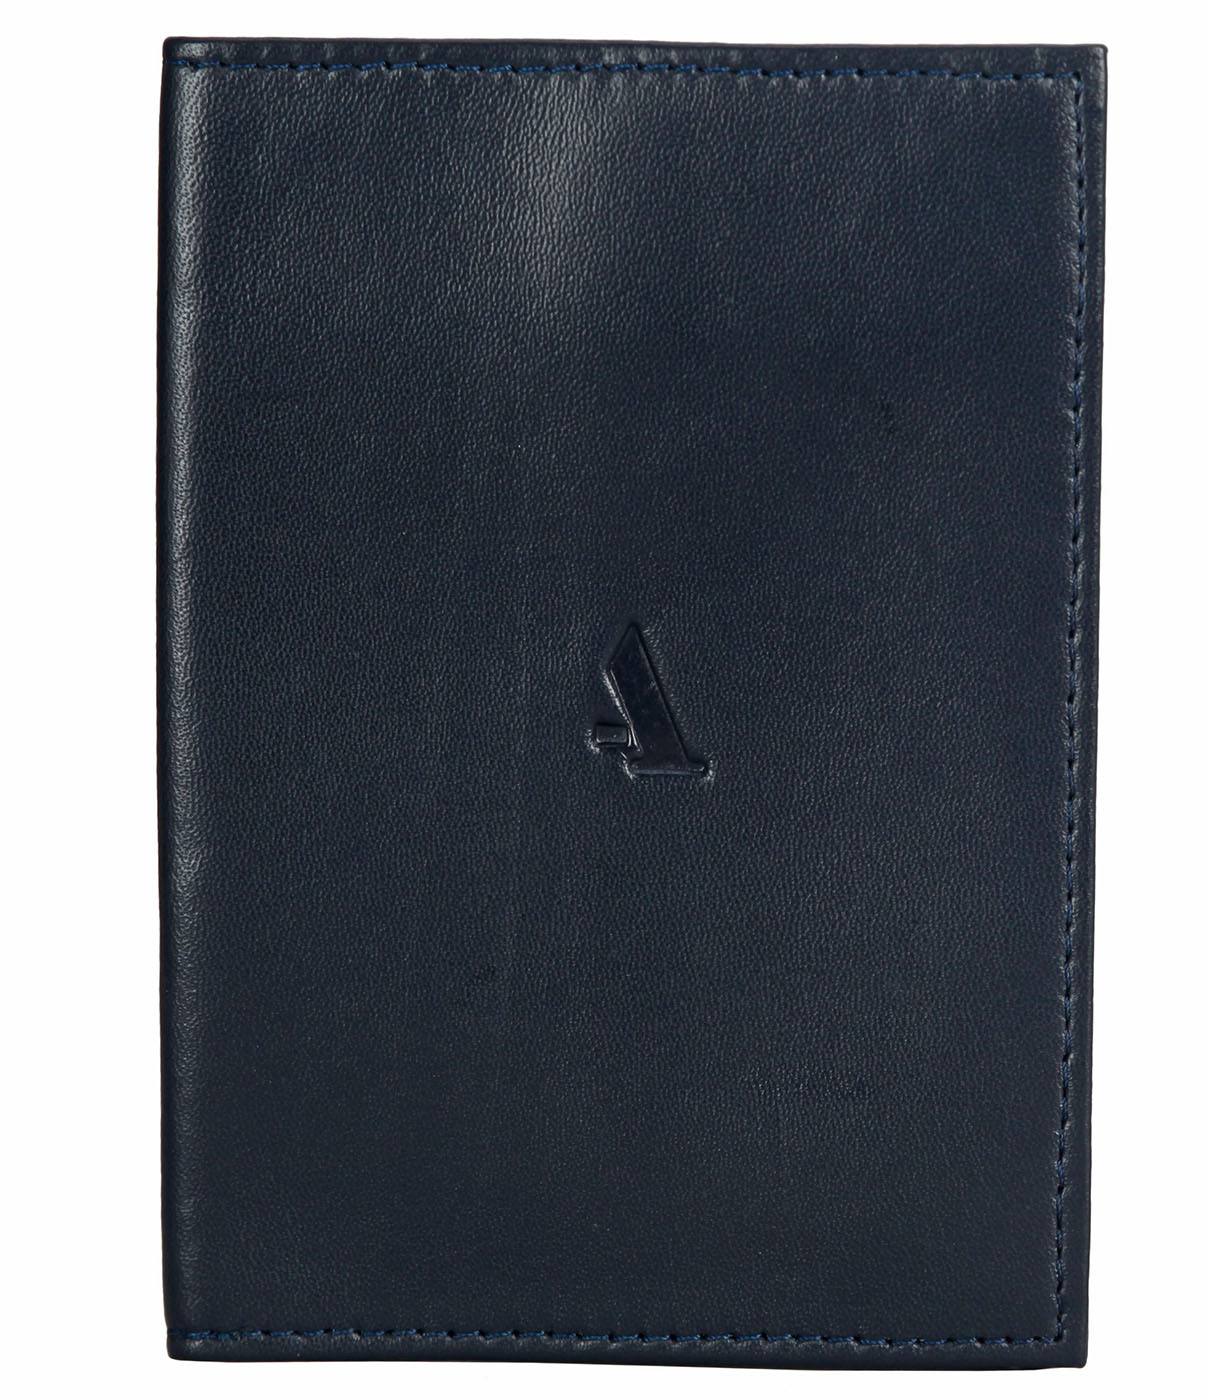 Travel Essential--Passport cover in Genuine Leather - Blue